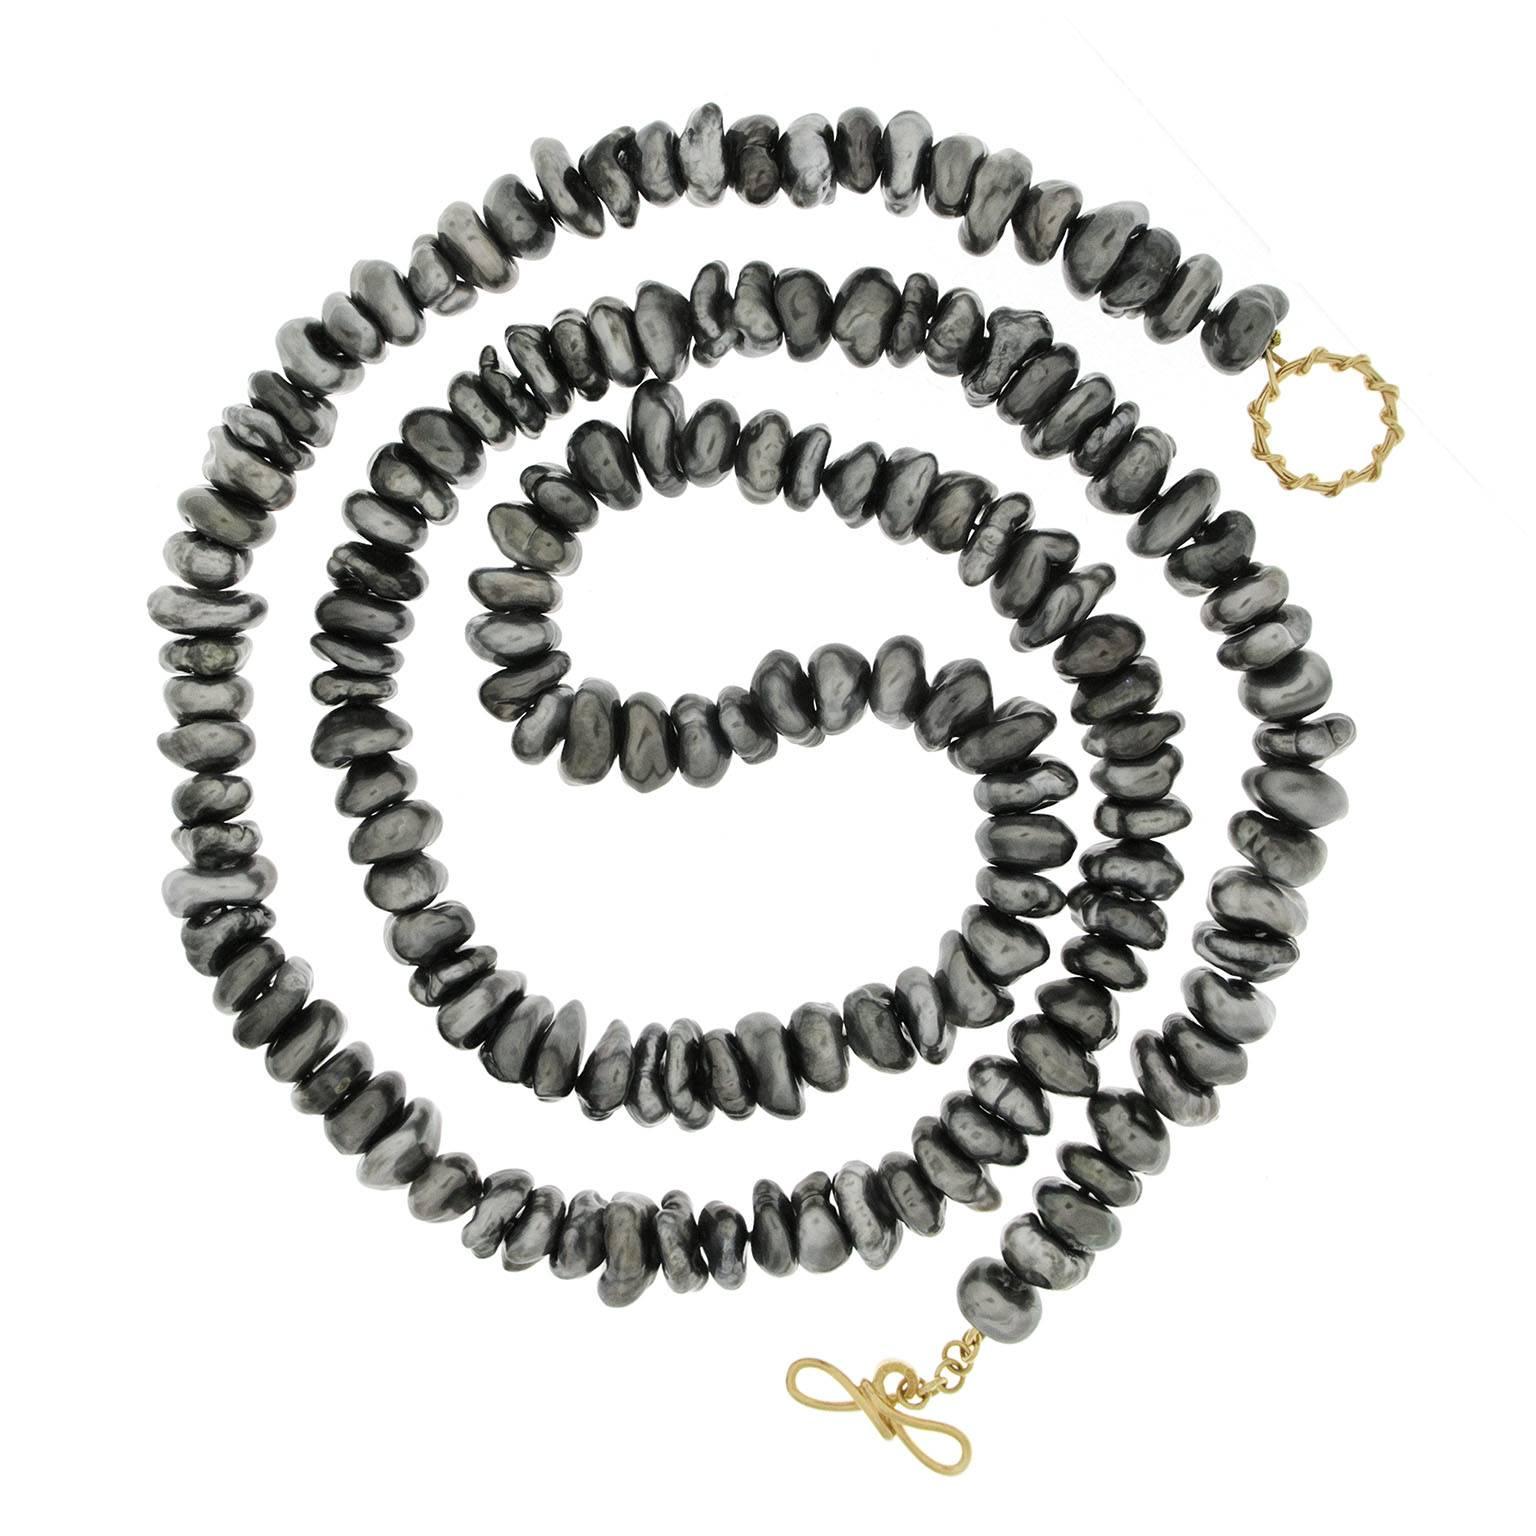 This unique necklace features a 36'' long single strand of Tahitian Keshi Pearls. It is finished with wire knot toggle clasp in 18kt yellow gold. So versatile that It can be worn as a long necklace or double up for a different look.